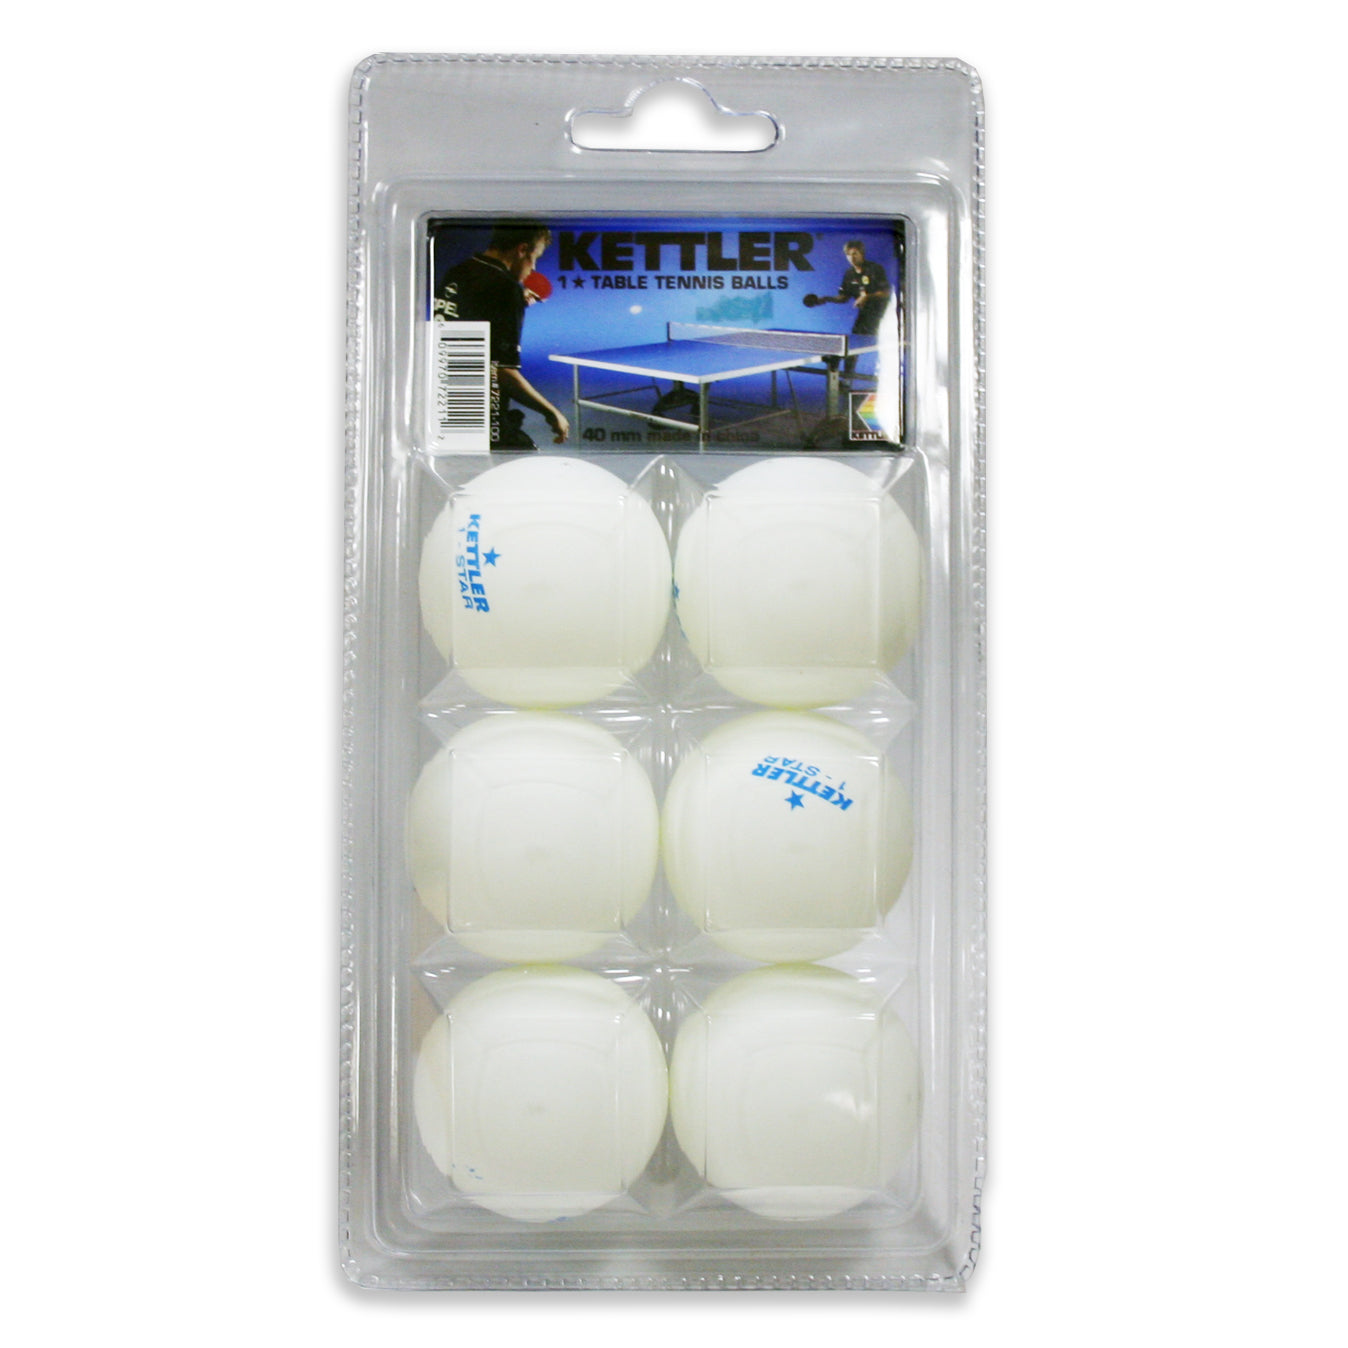 One star table tennis training balls in packaging